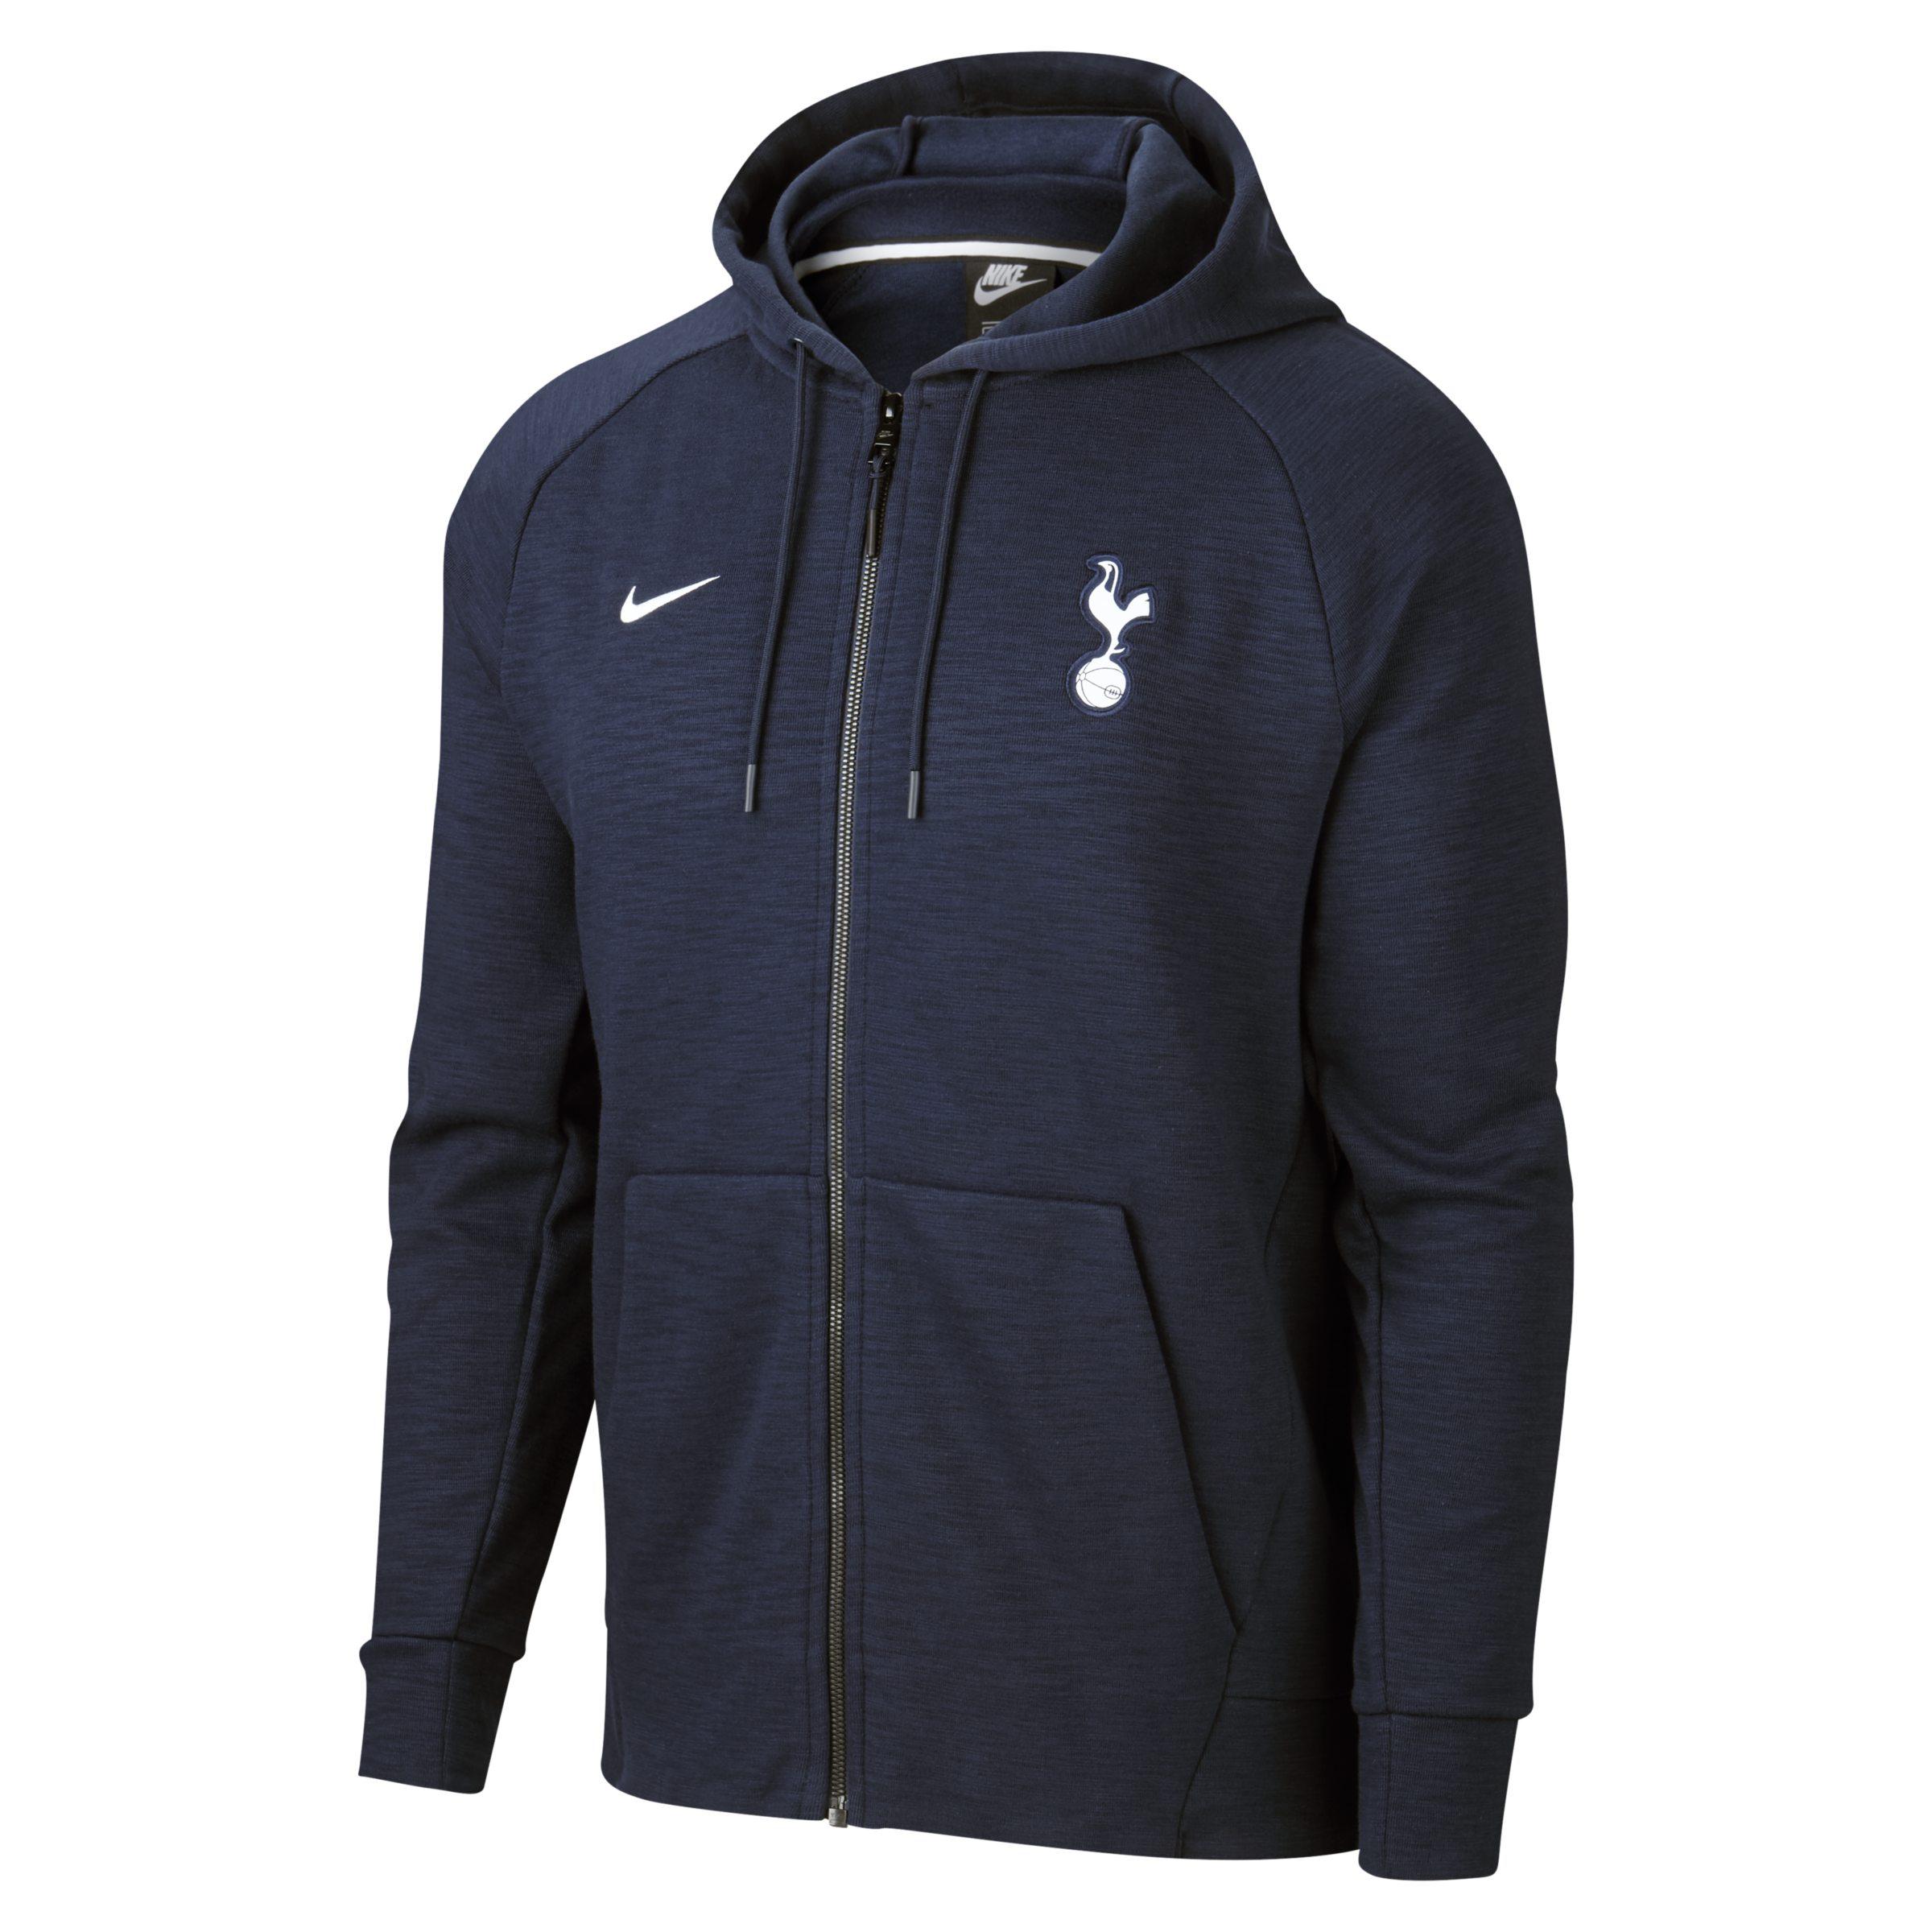 Tottenham Hoodie : Get the new official tottenham jerseys among our ...